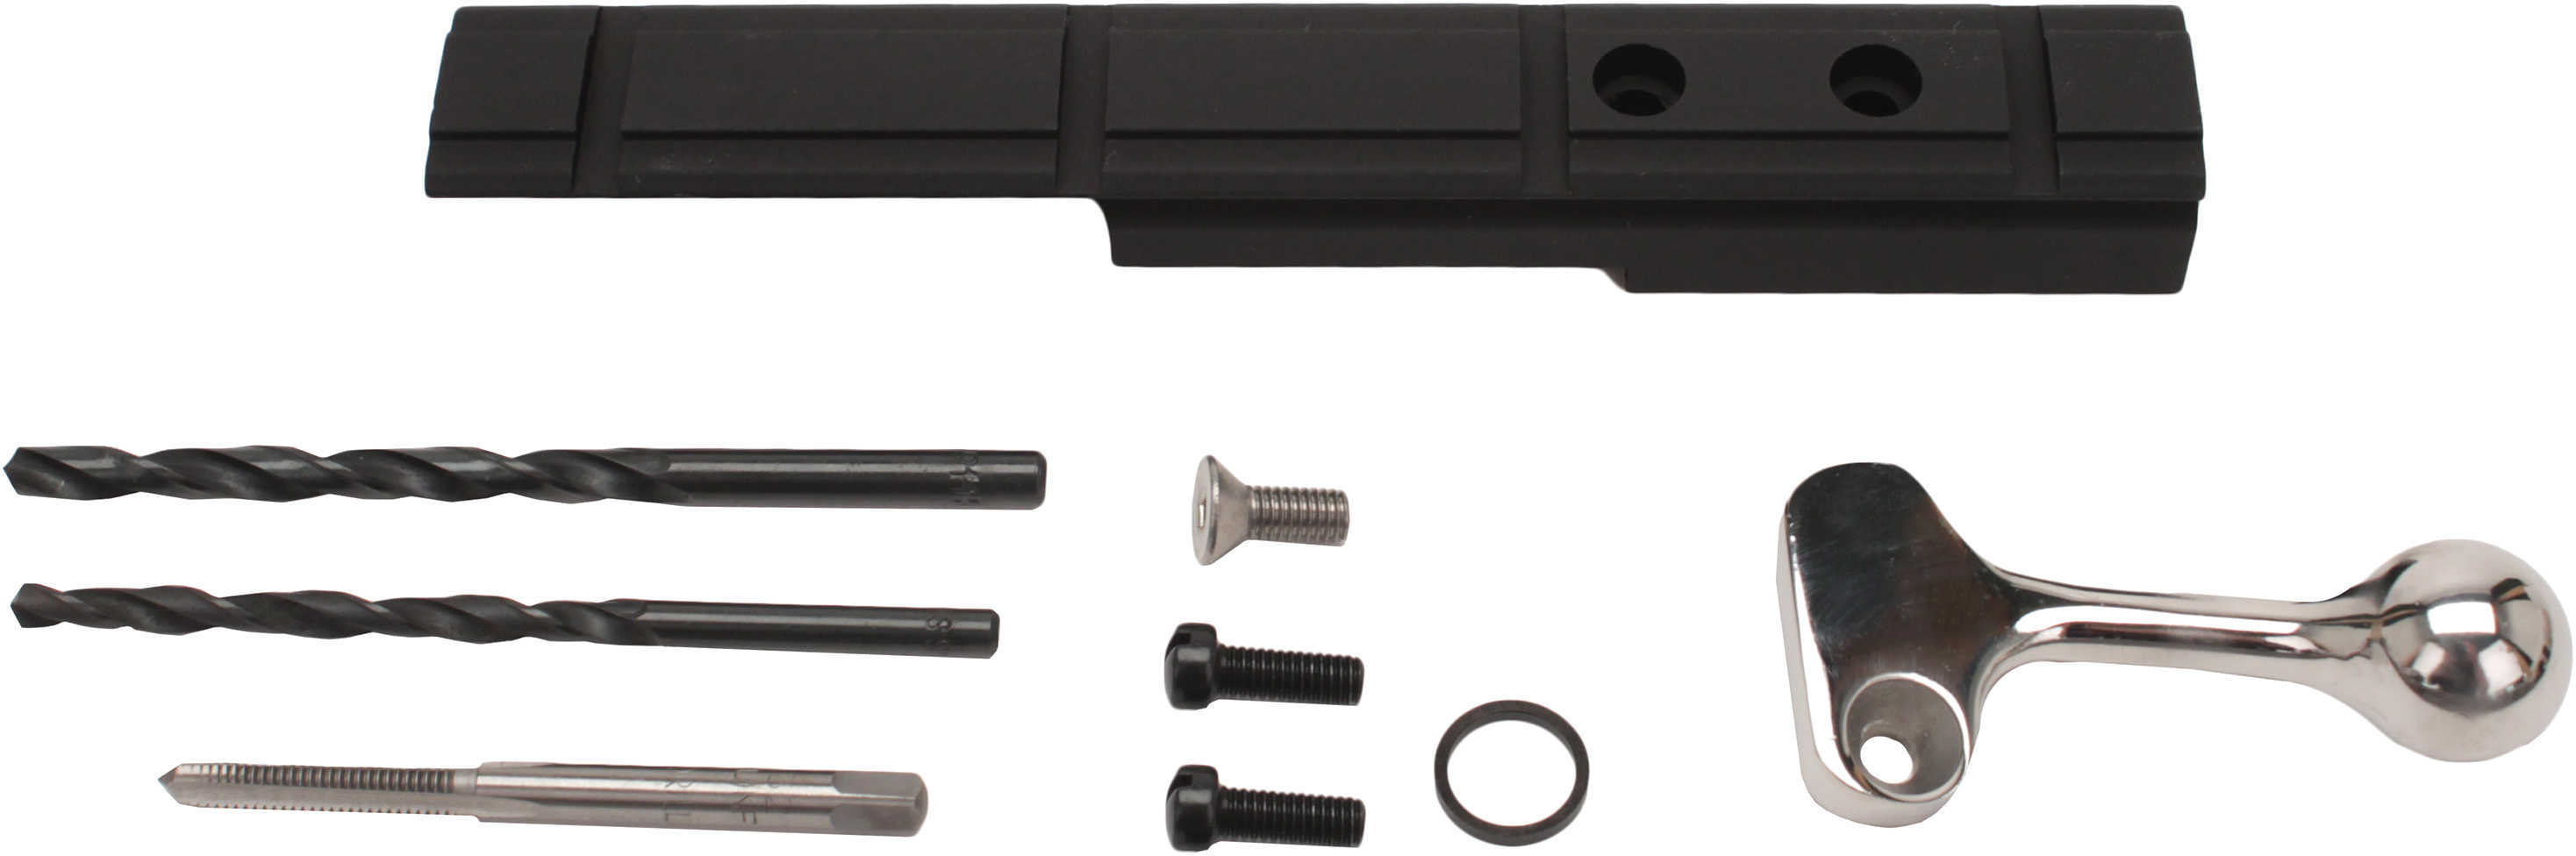 Advanced Technology Scope Mount With Bolt Handle Md: MOI0600